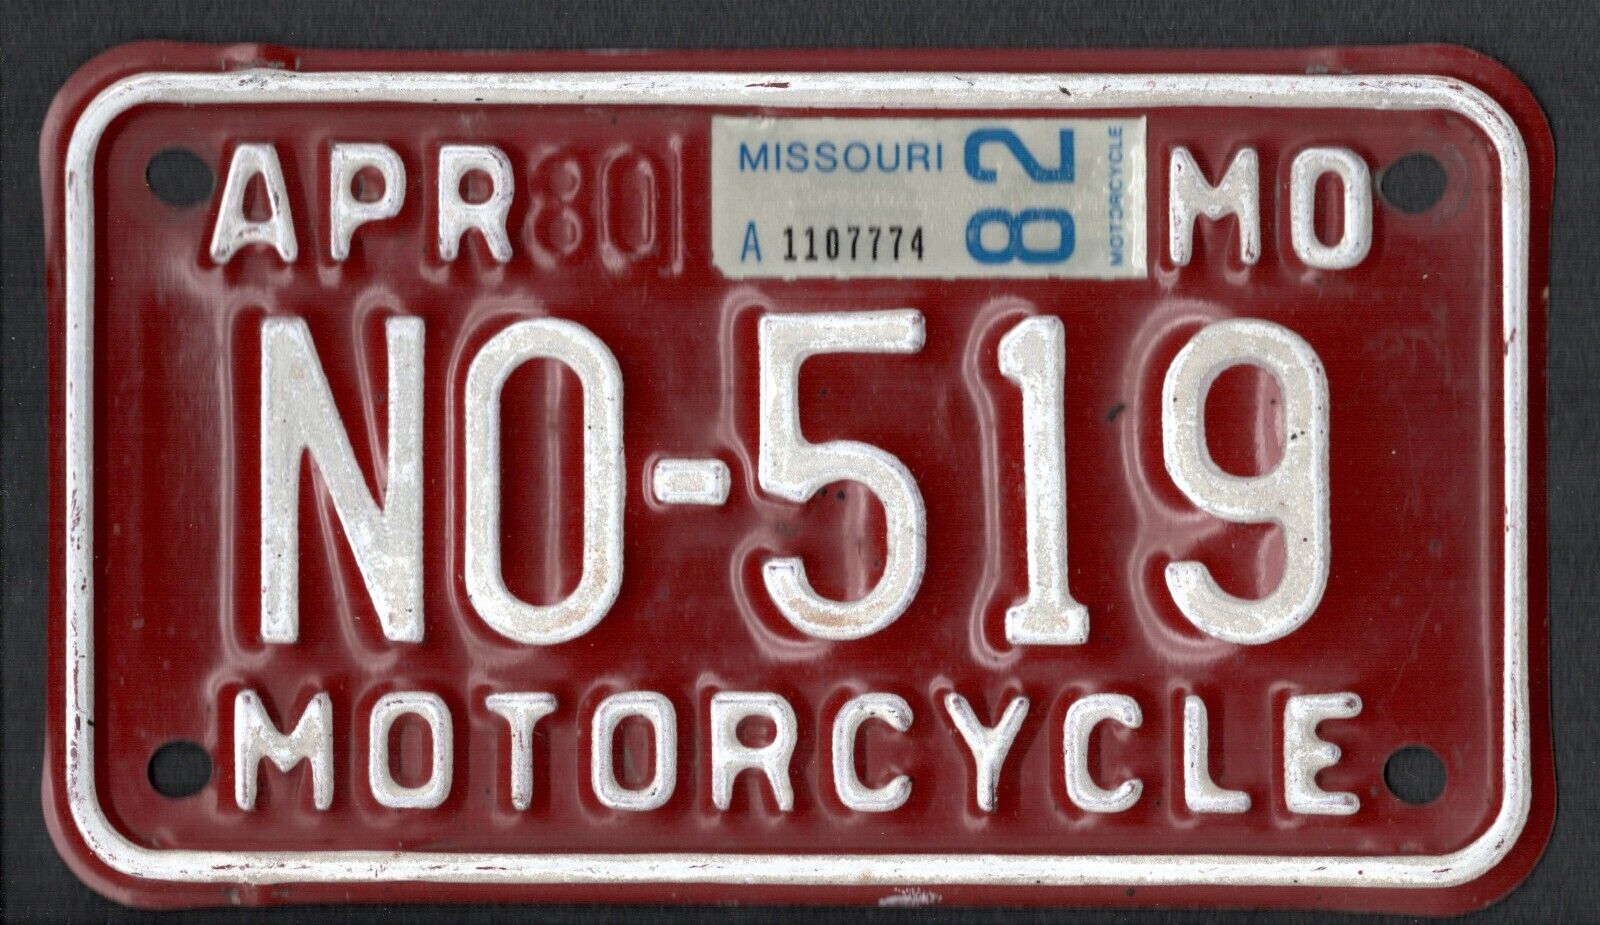 Missouri 1982 Motorcycle Licence Plate